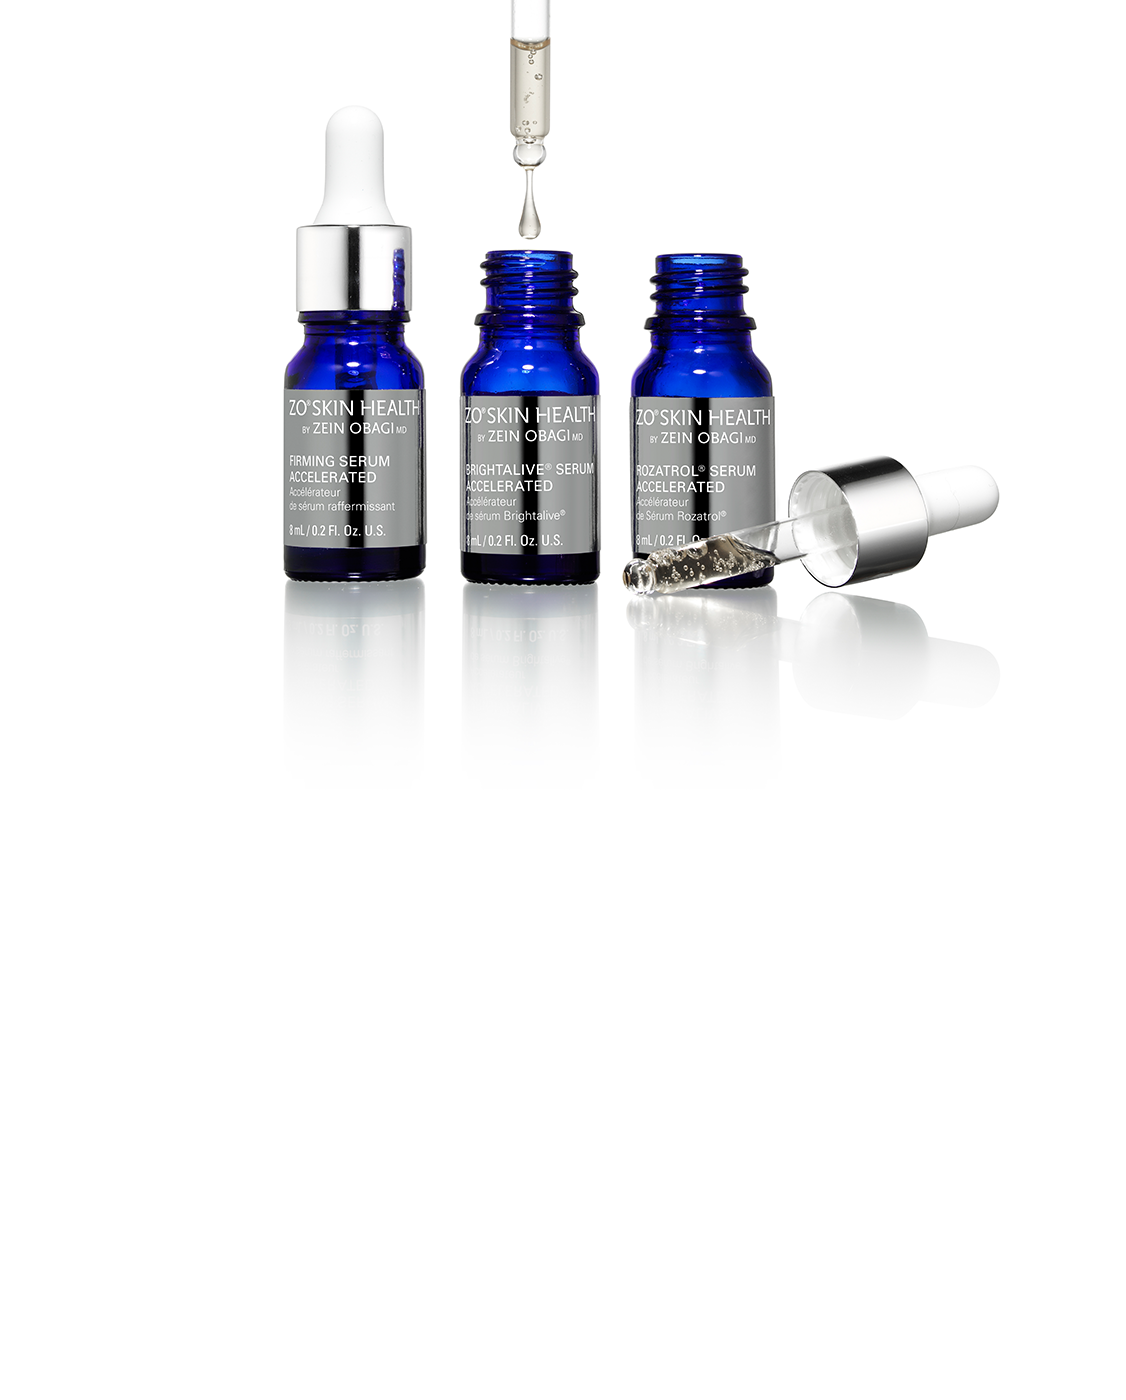 accelerated serums banner